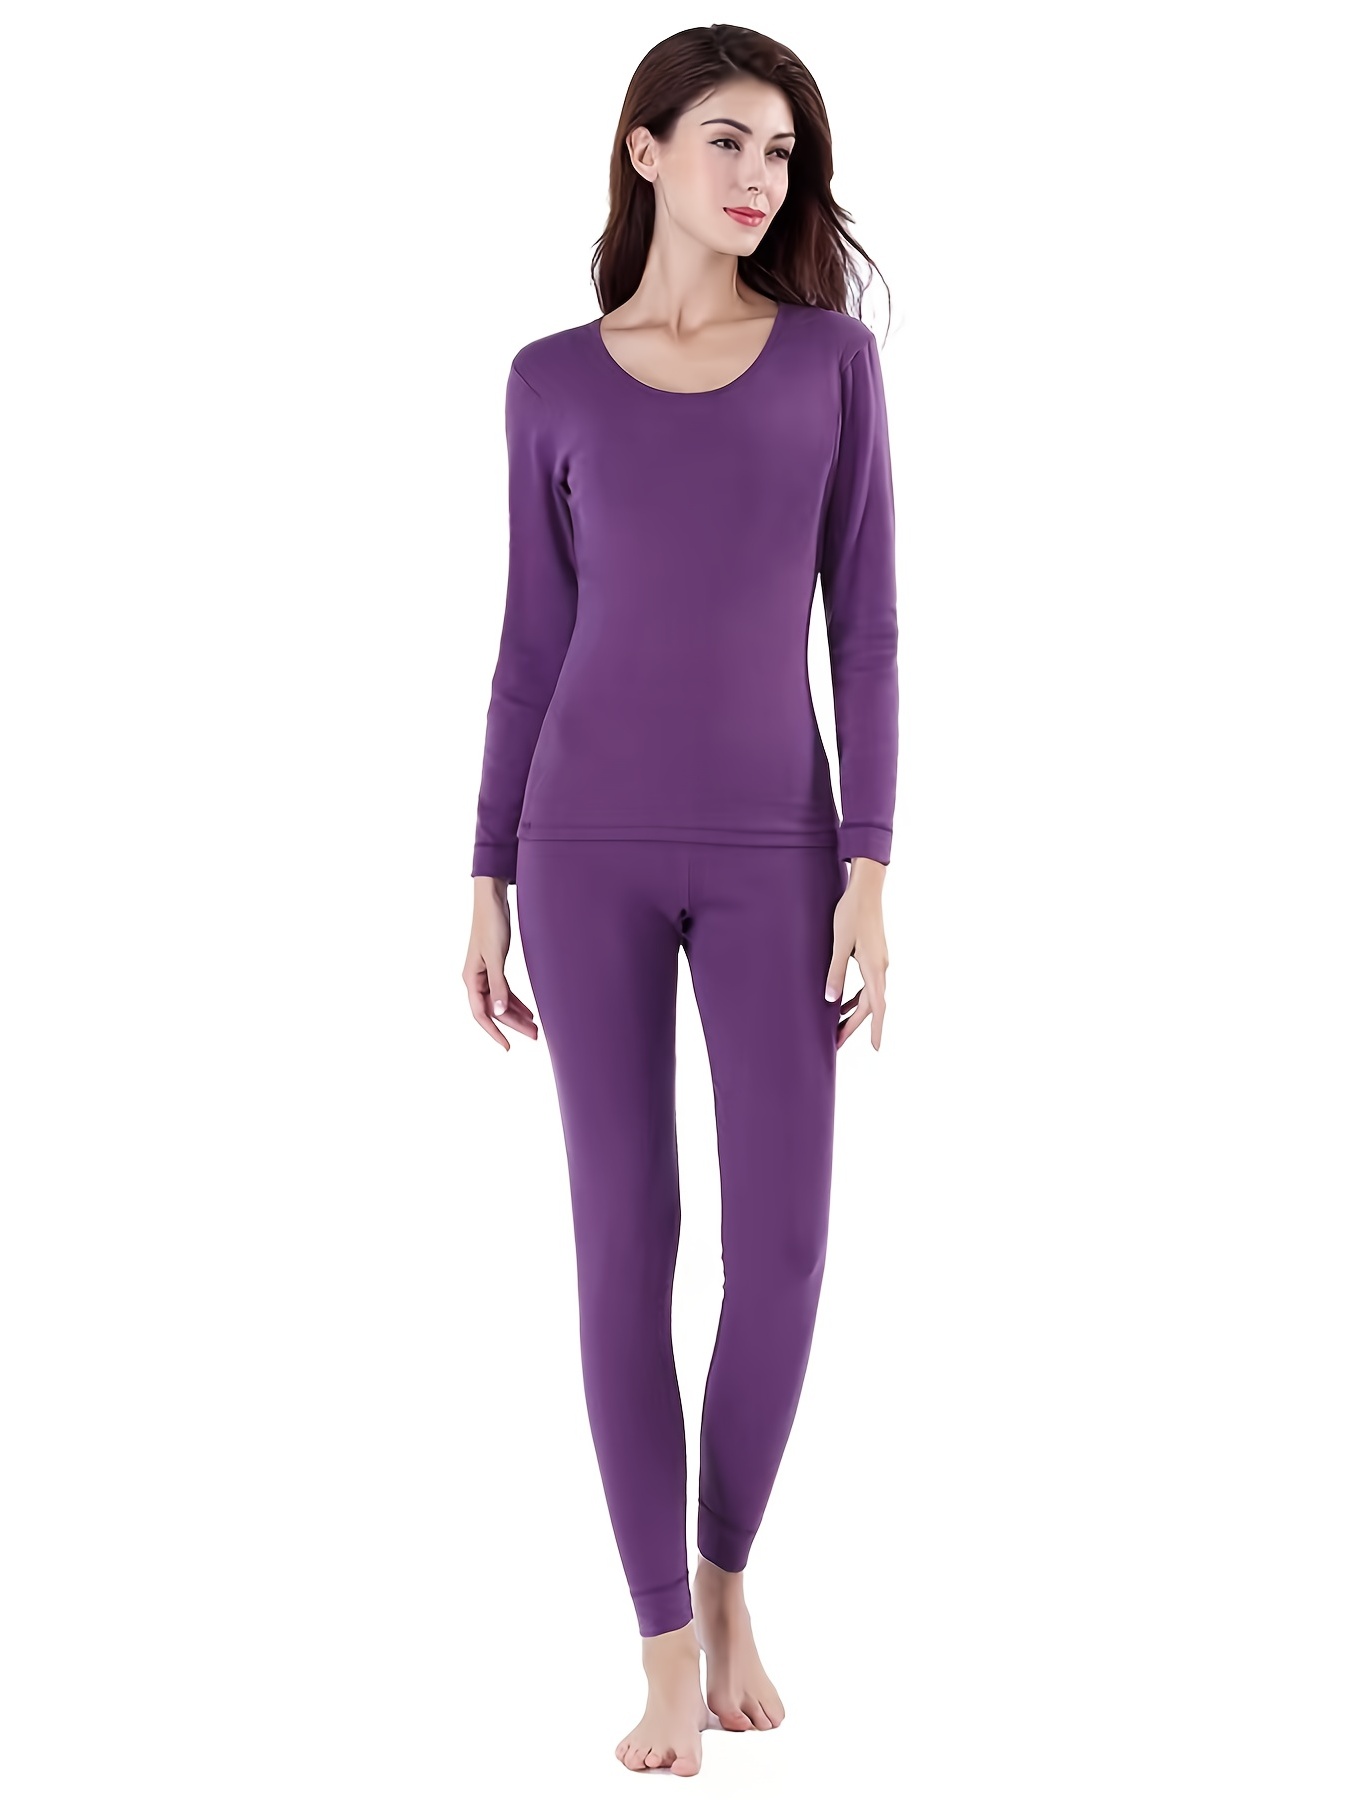 Wholesale sexy women long johns For Comfort And Warmth In Style